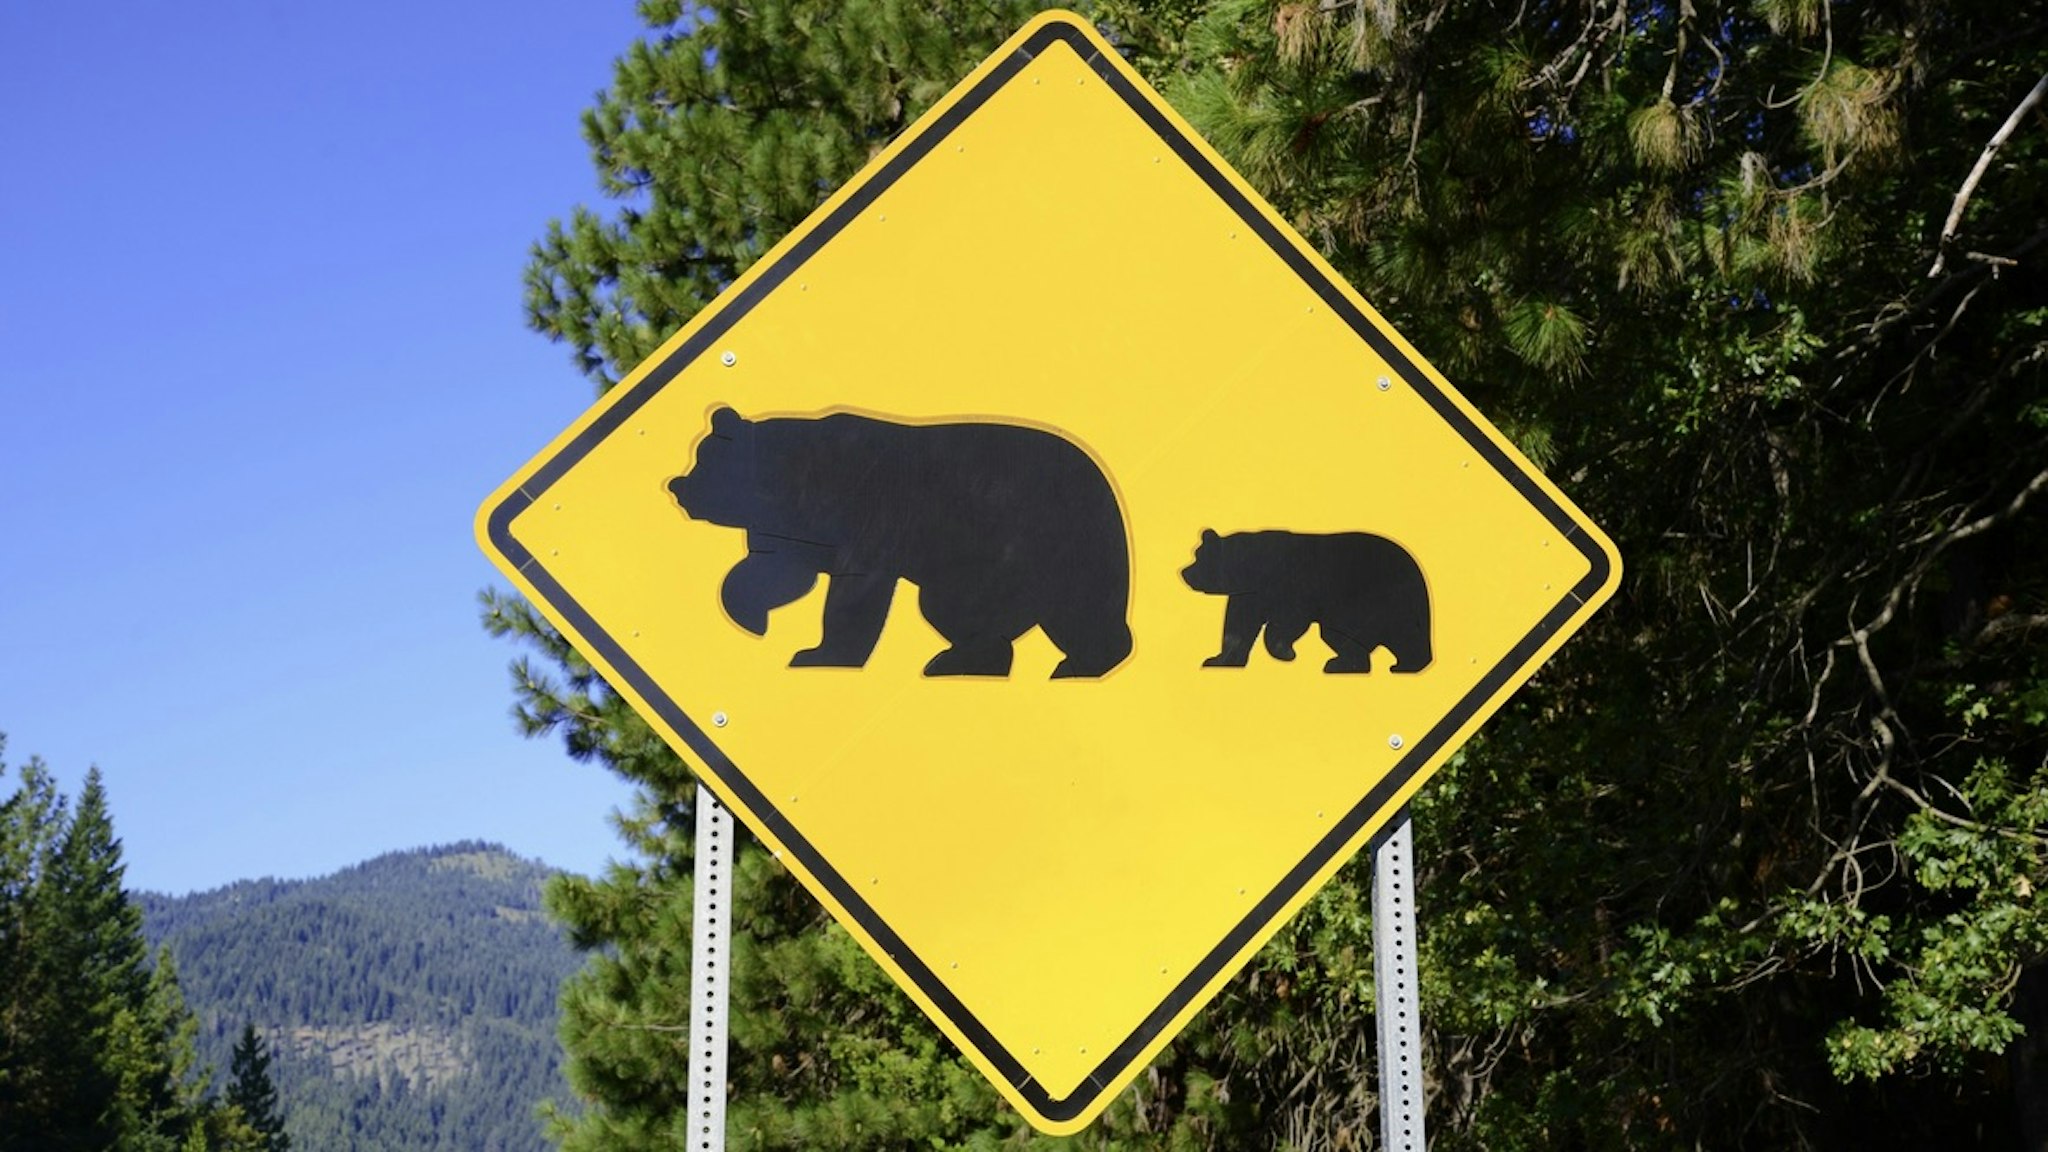 Bear crossing sign on the road - stock photo Bear crossing sign on the road robertcicchetti via Getty Images